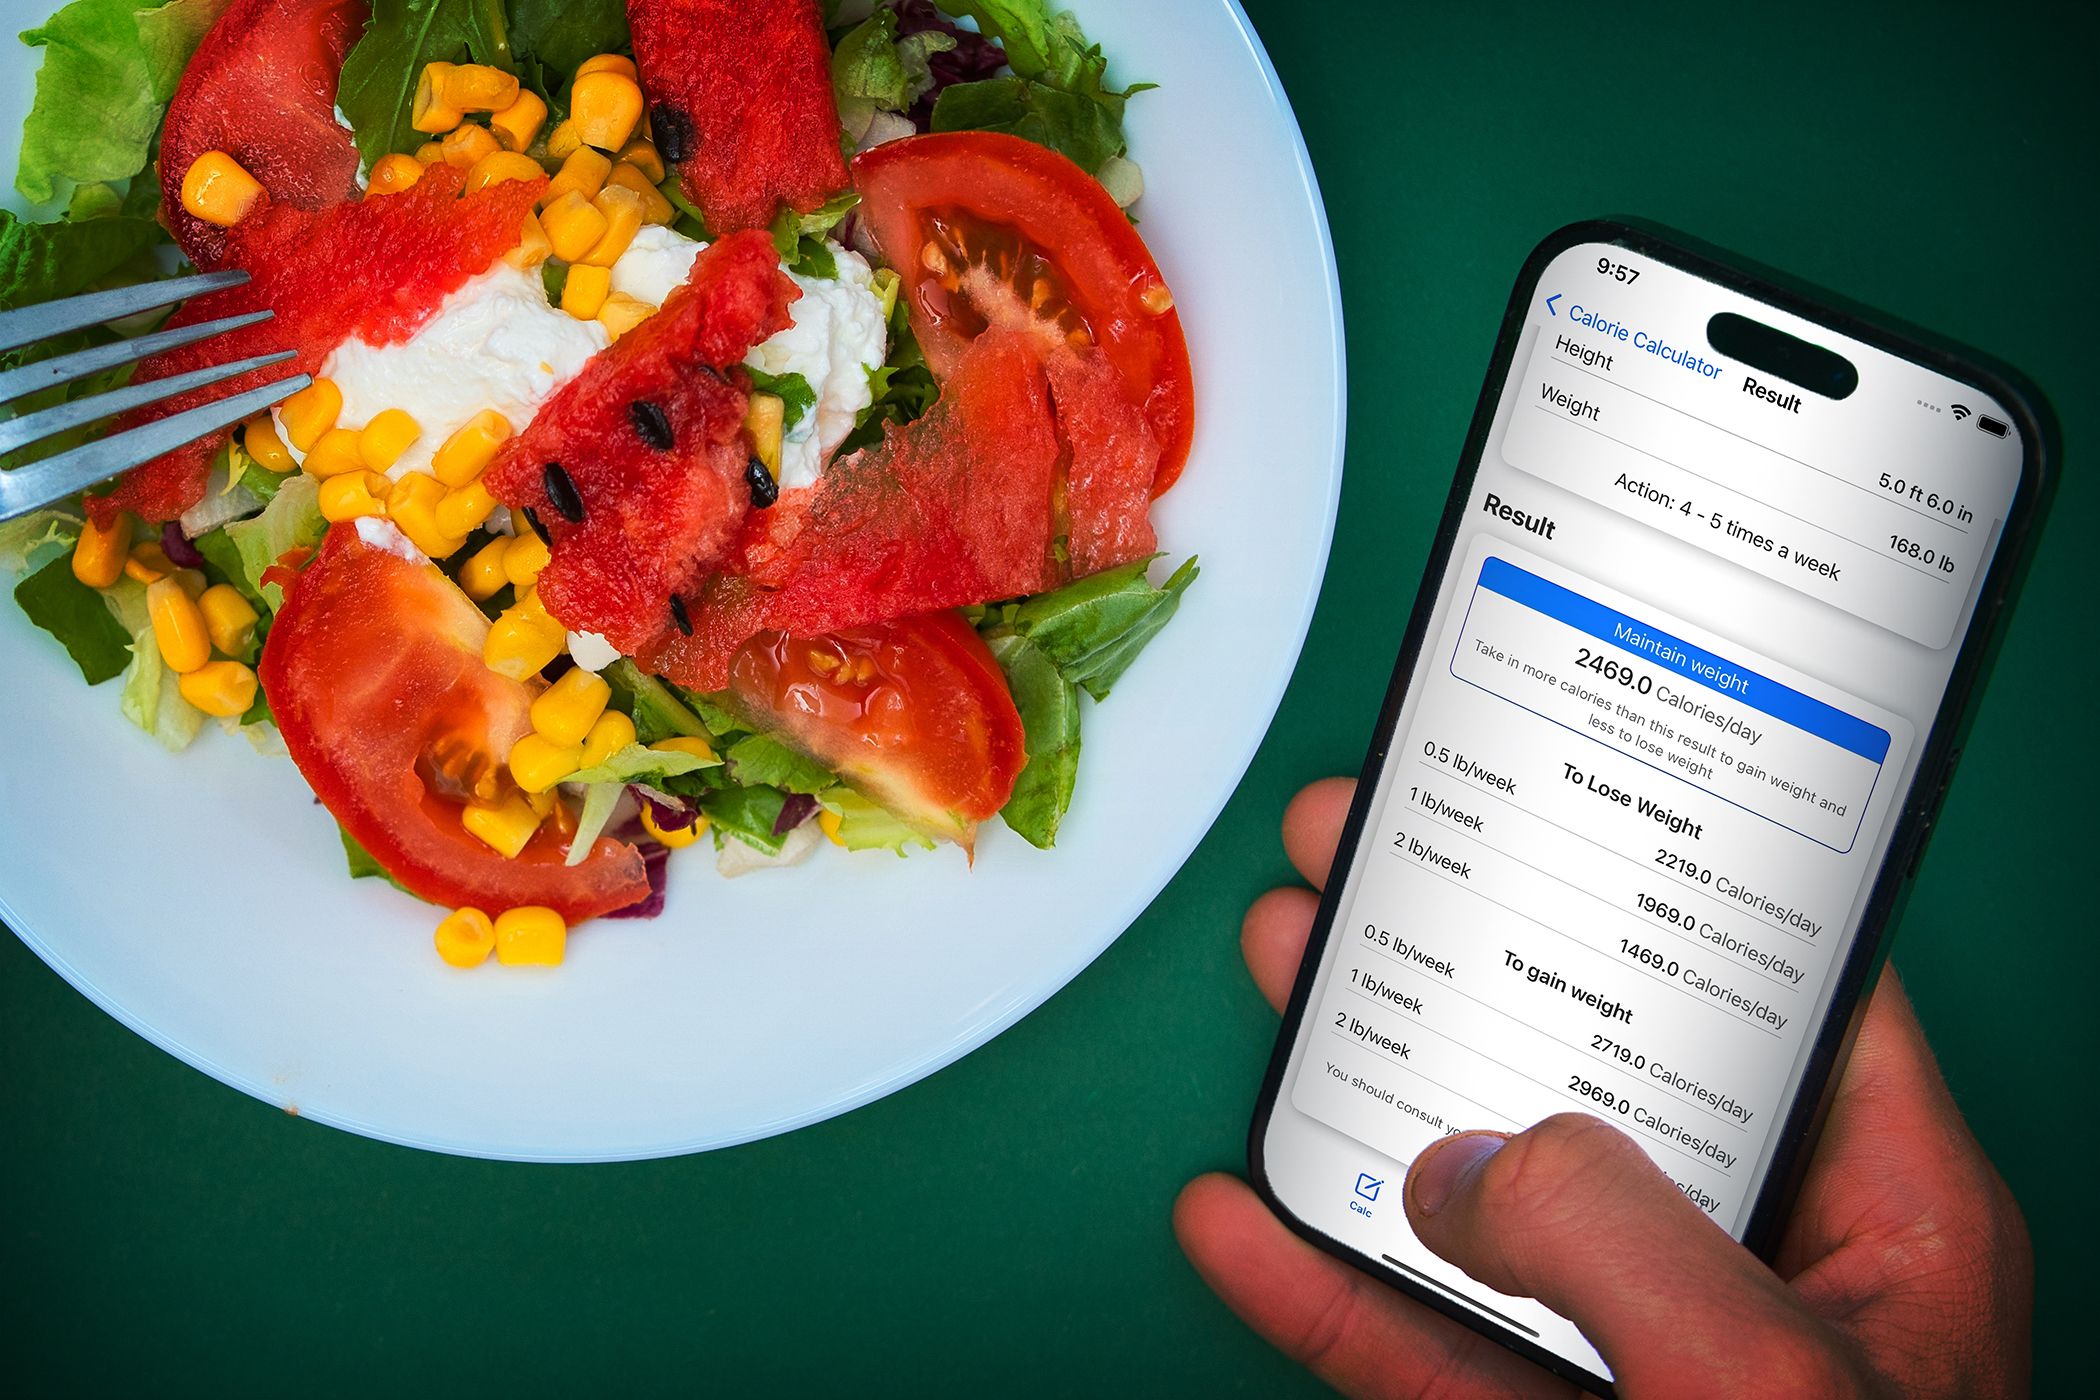 A person eatin a salad while using a cellphone showing a calorie calculator interface